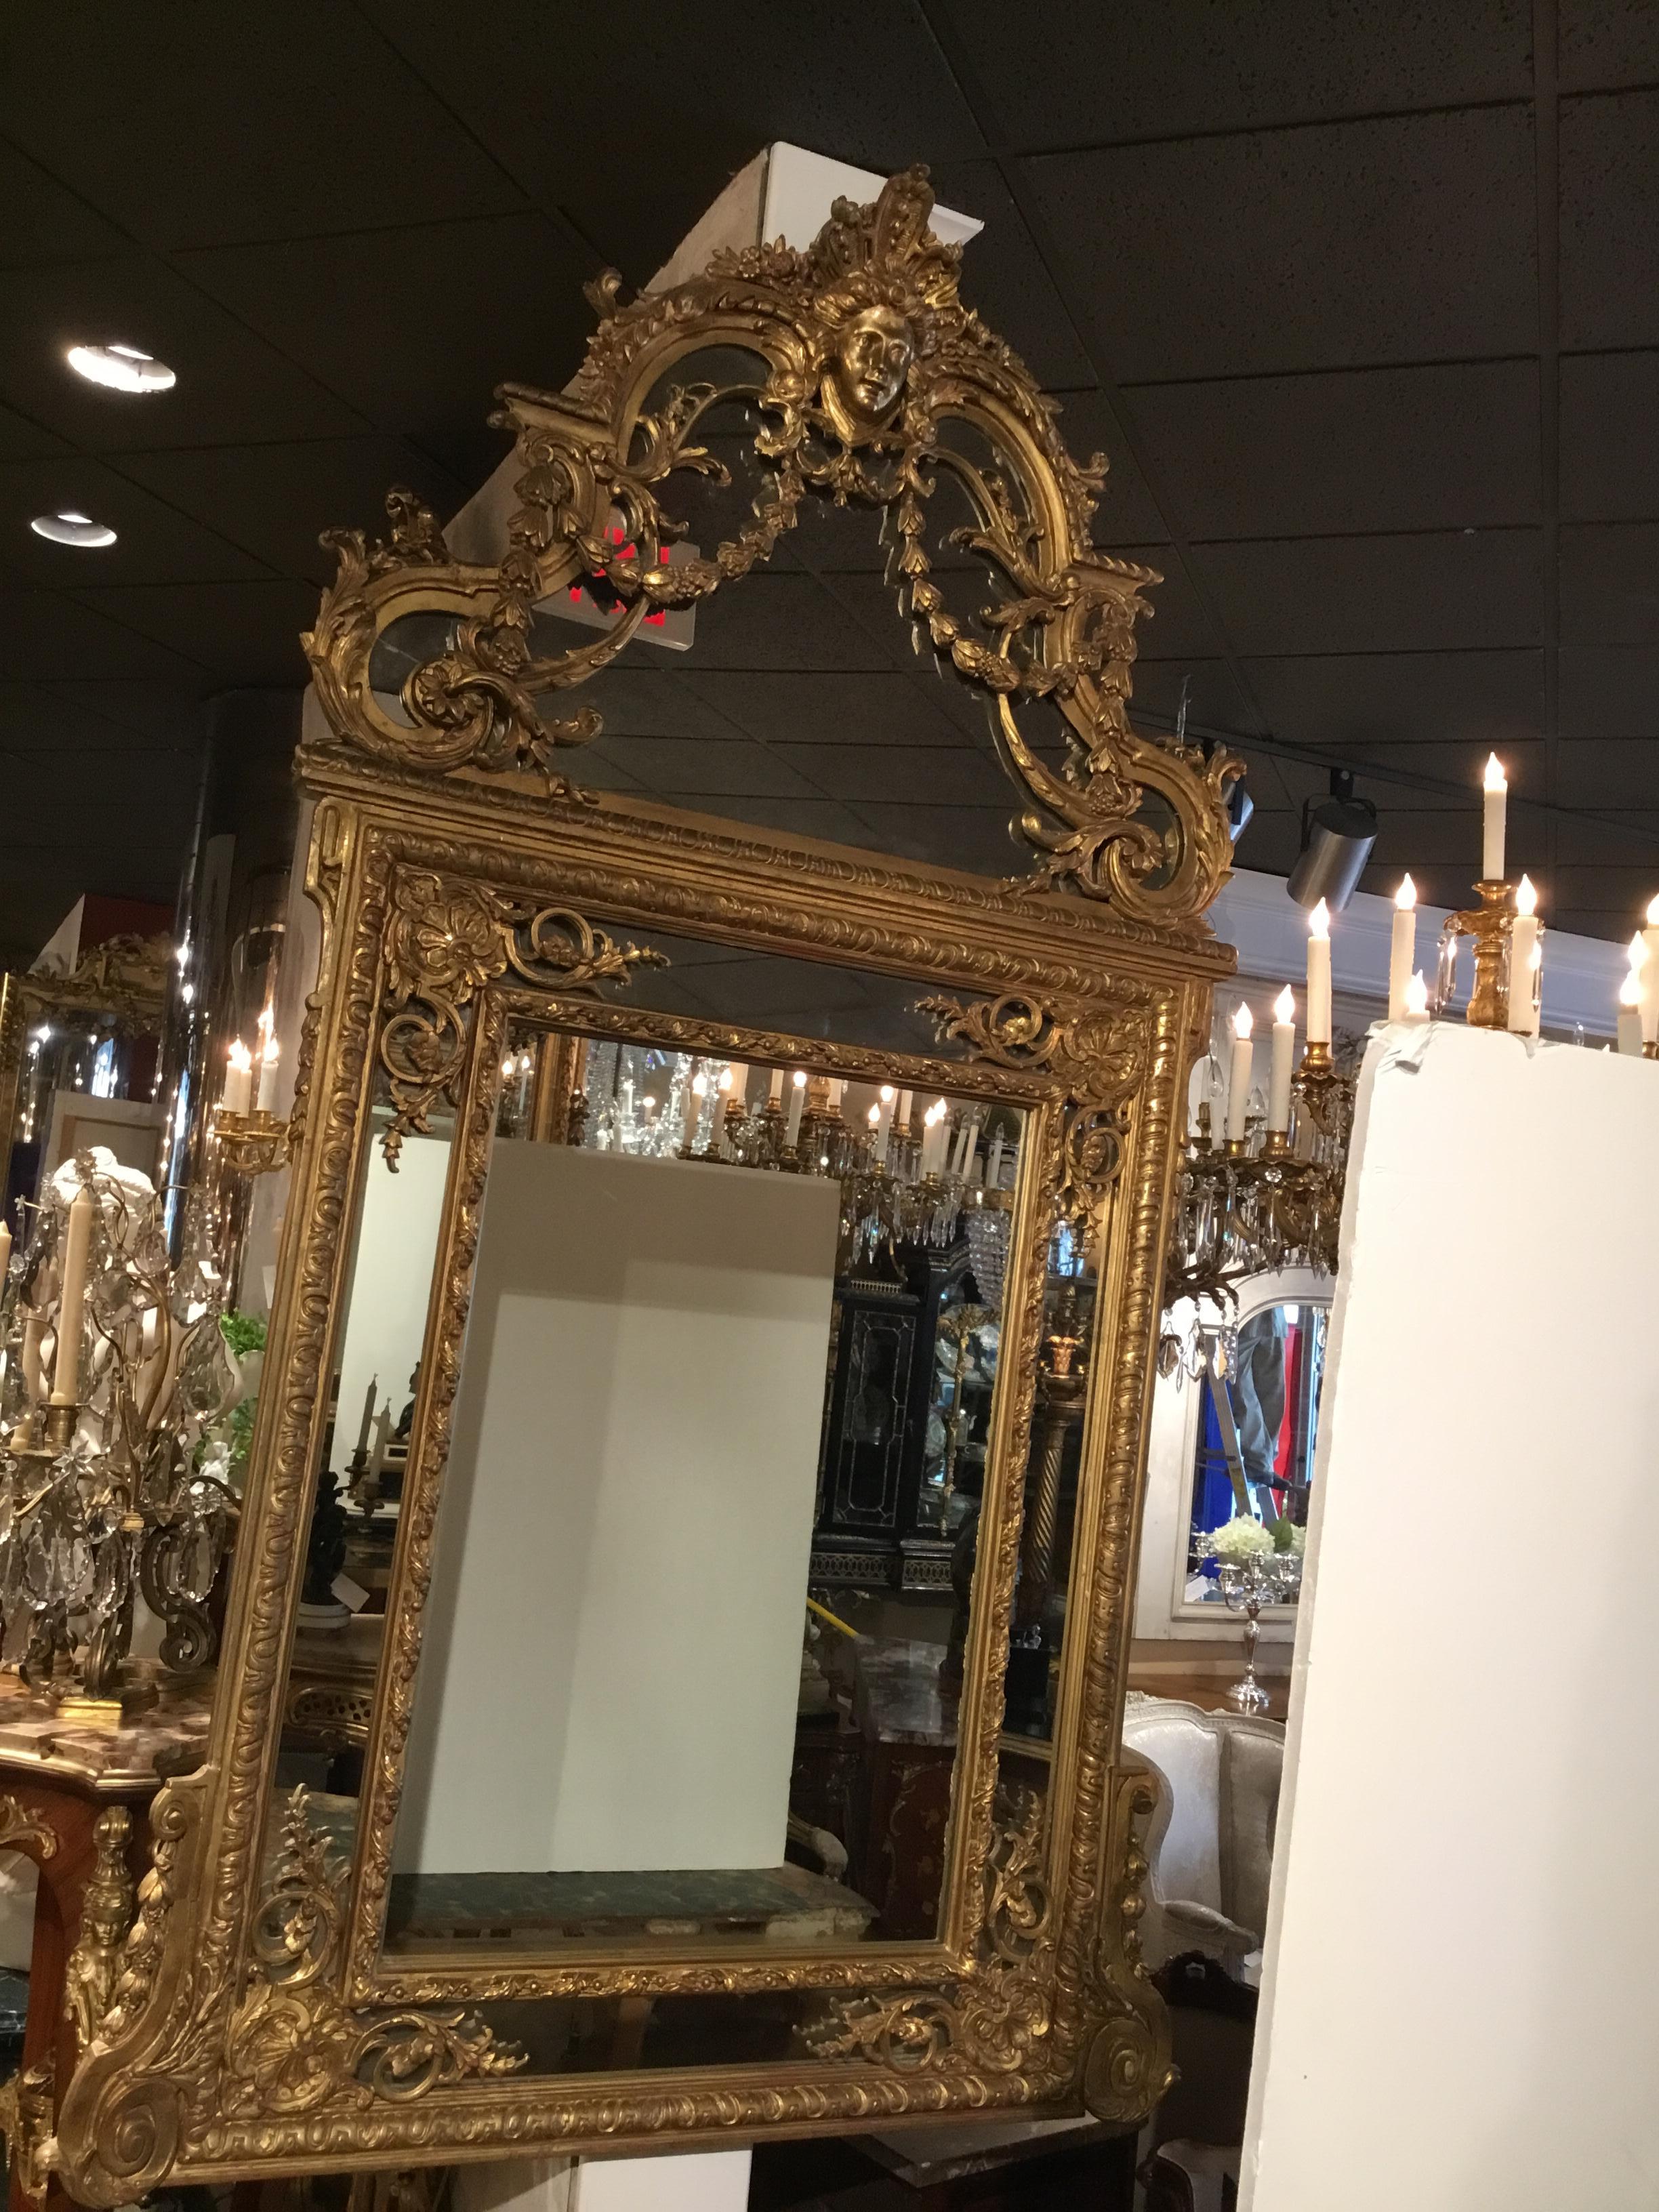 A mask of Minerva is centered at the crest of this monumental mirror.
En chapeau cornice continues with bell flower garlands and foliate carving, gently scrolling curved  framing decorates the sides. The mirror has a second interior frame cushioning